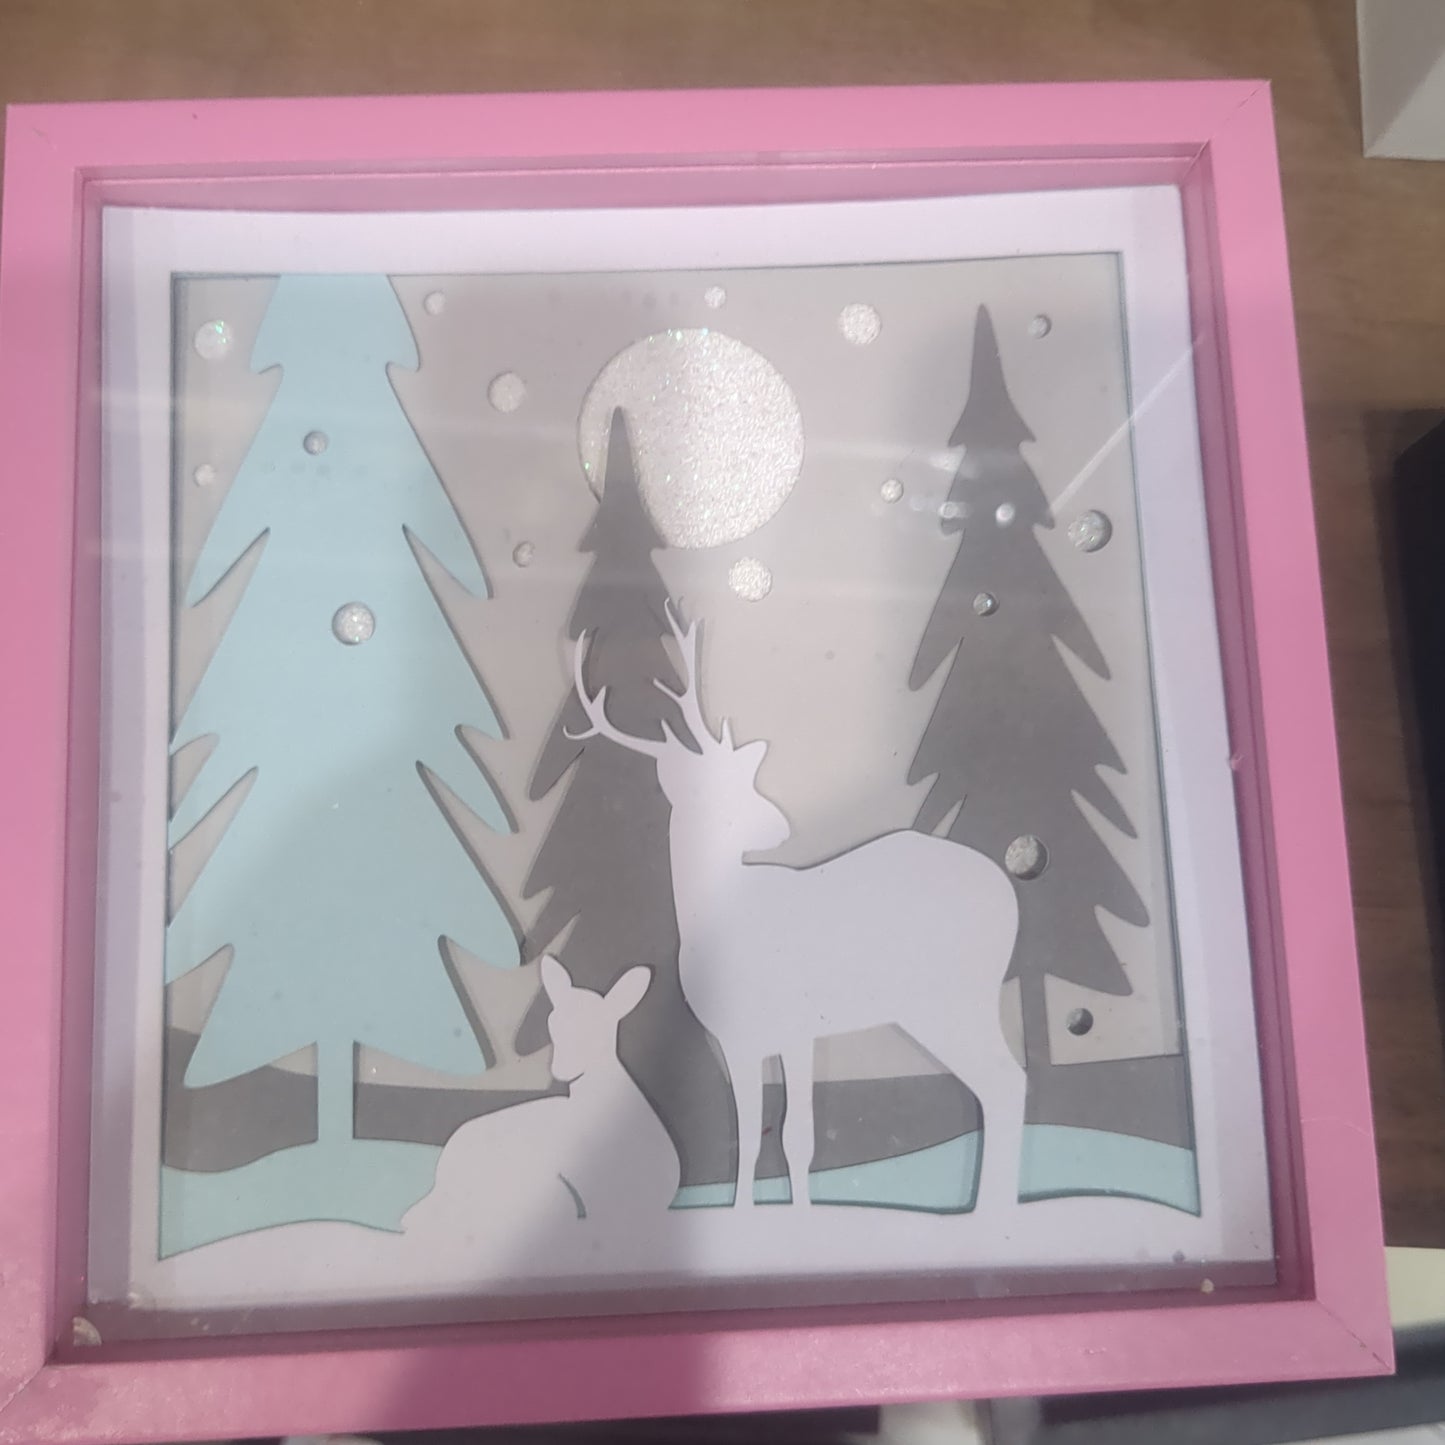 5 1/2 x 5 1/2 pink shadow box with paper cut deer in Forest serene